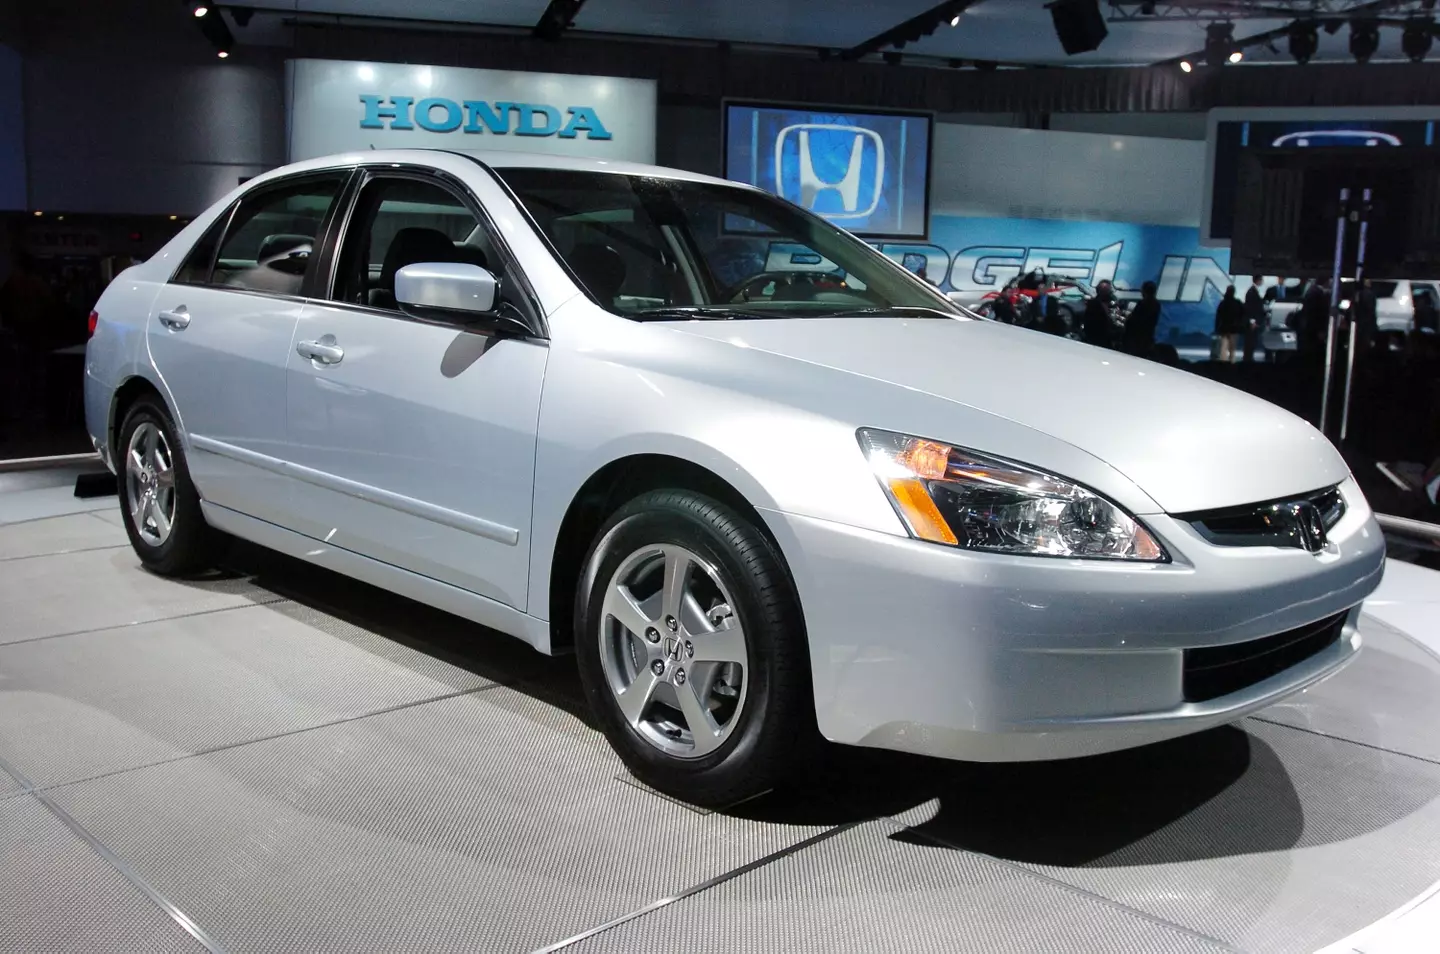 The Honda Accord was given as a recommendation.